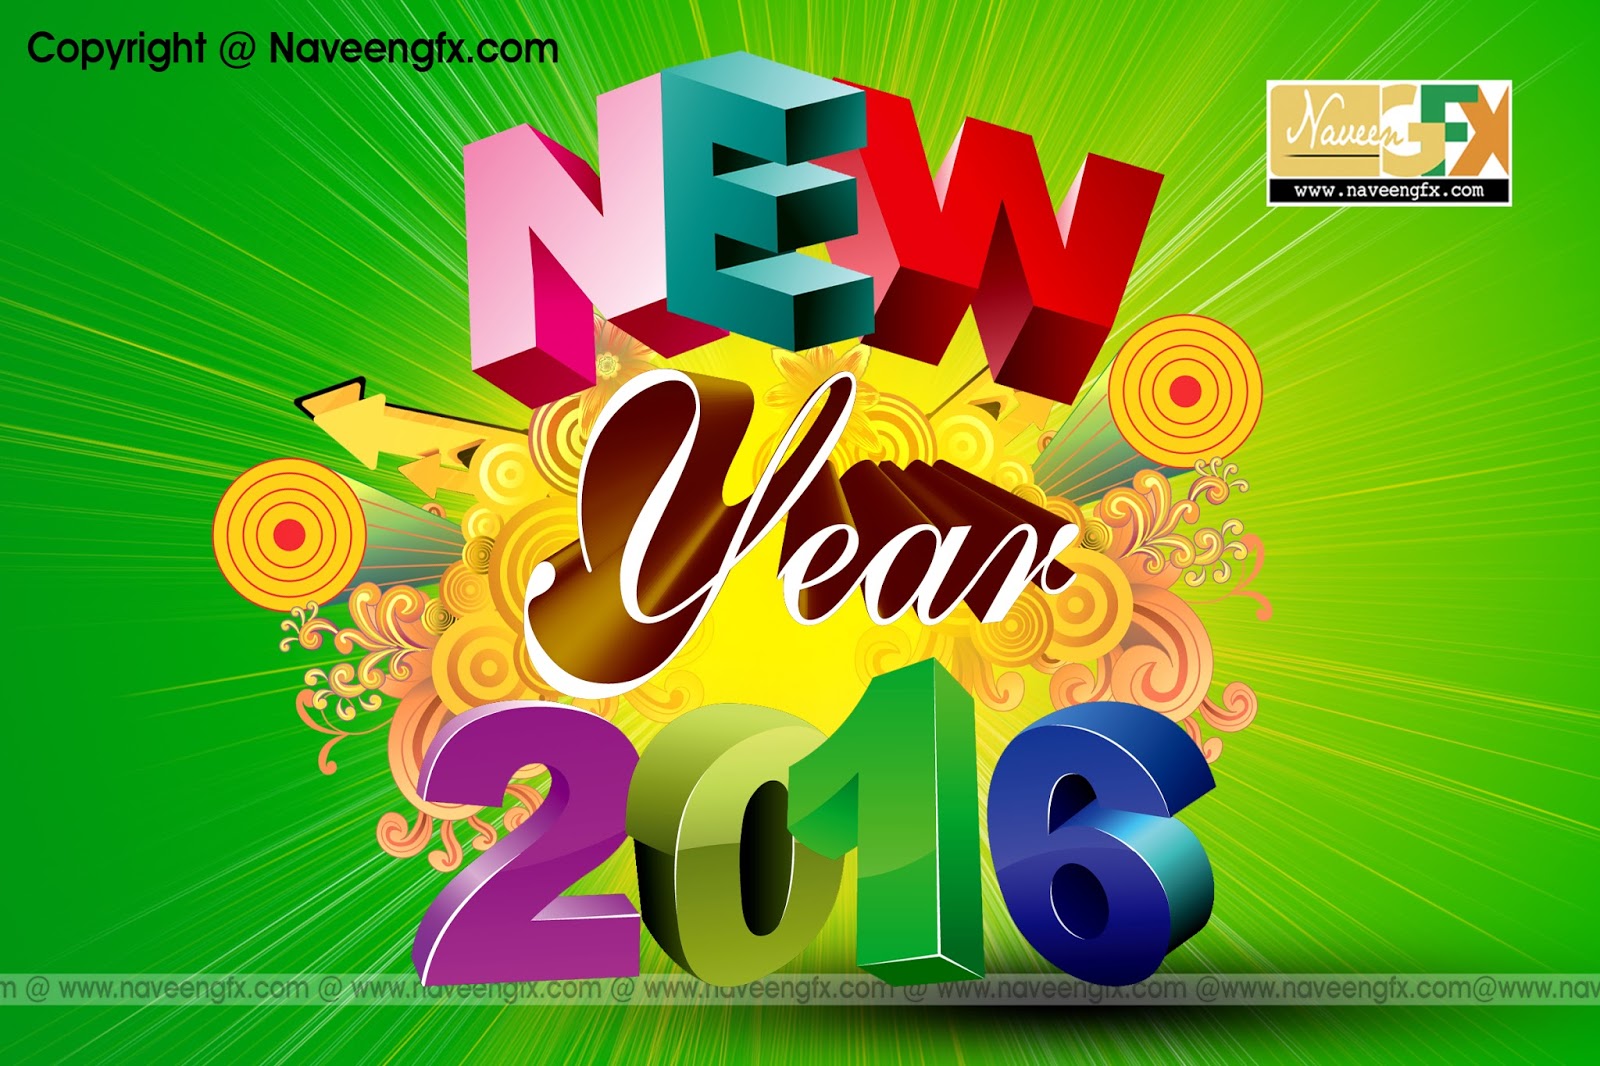 new-year-greeting-cards-psd-templates-free-downloads-naveengfx